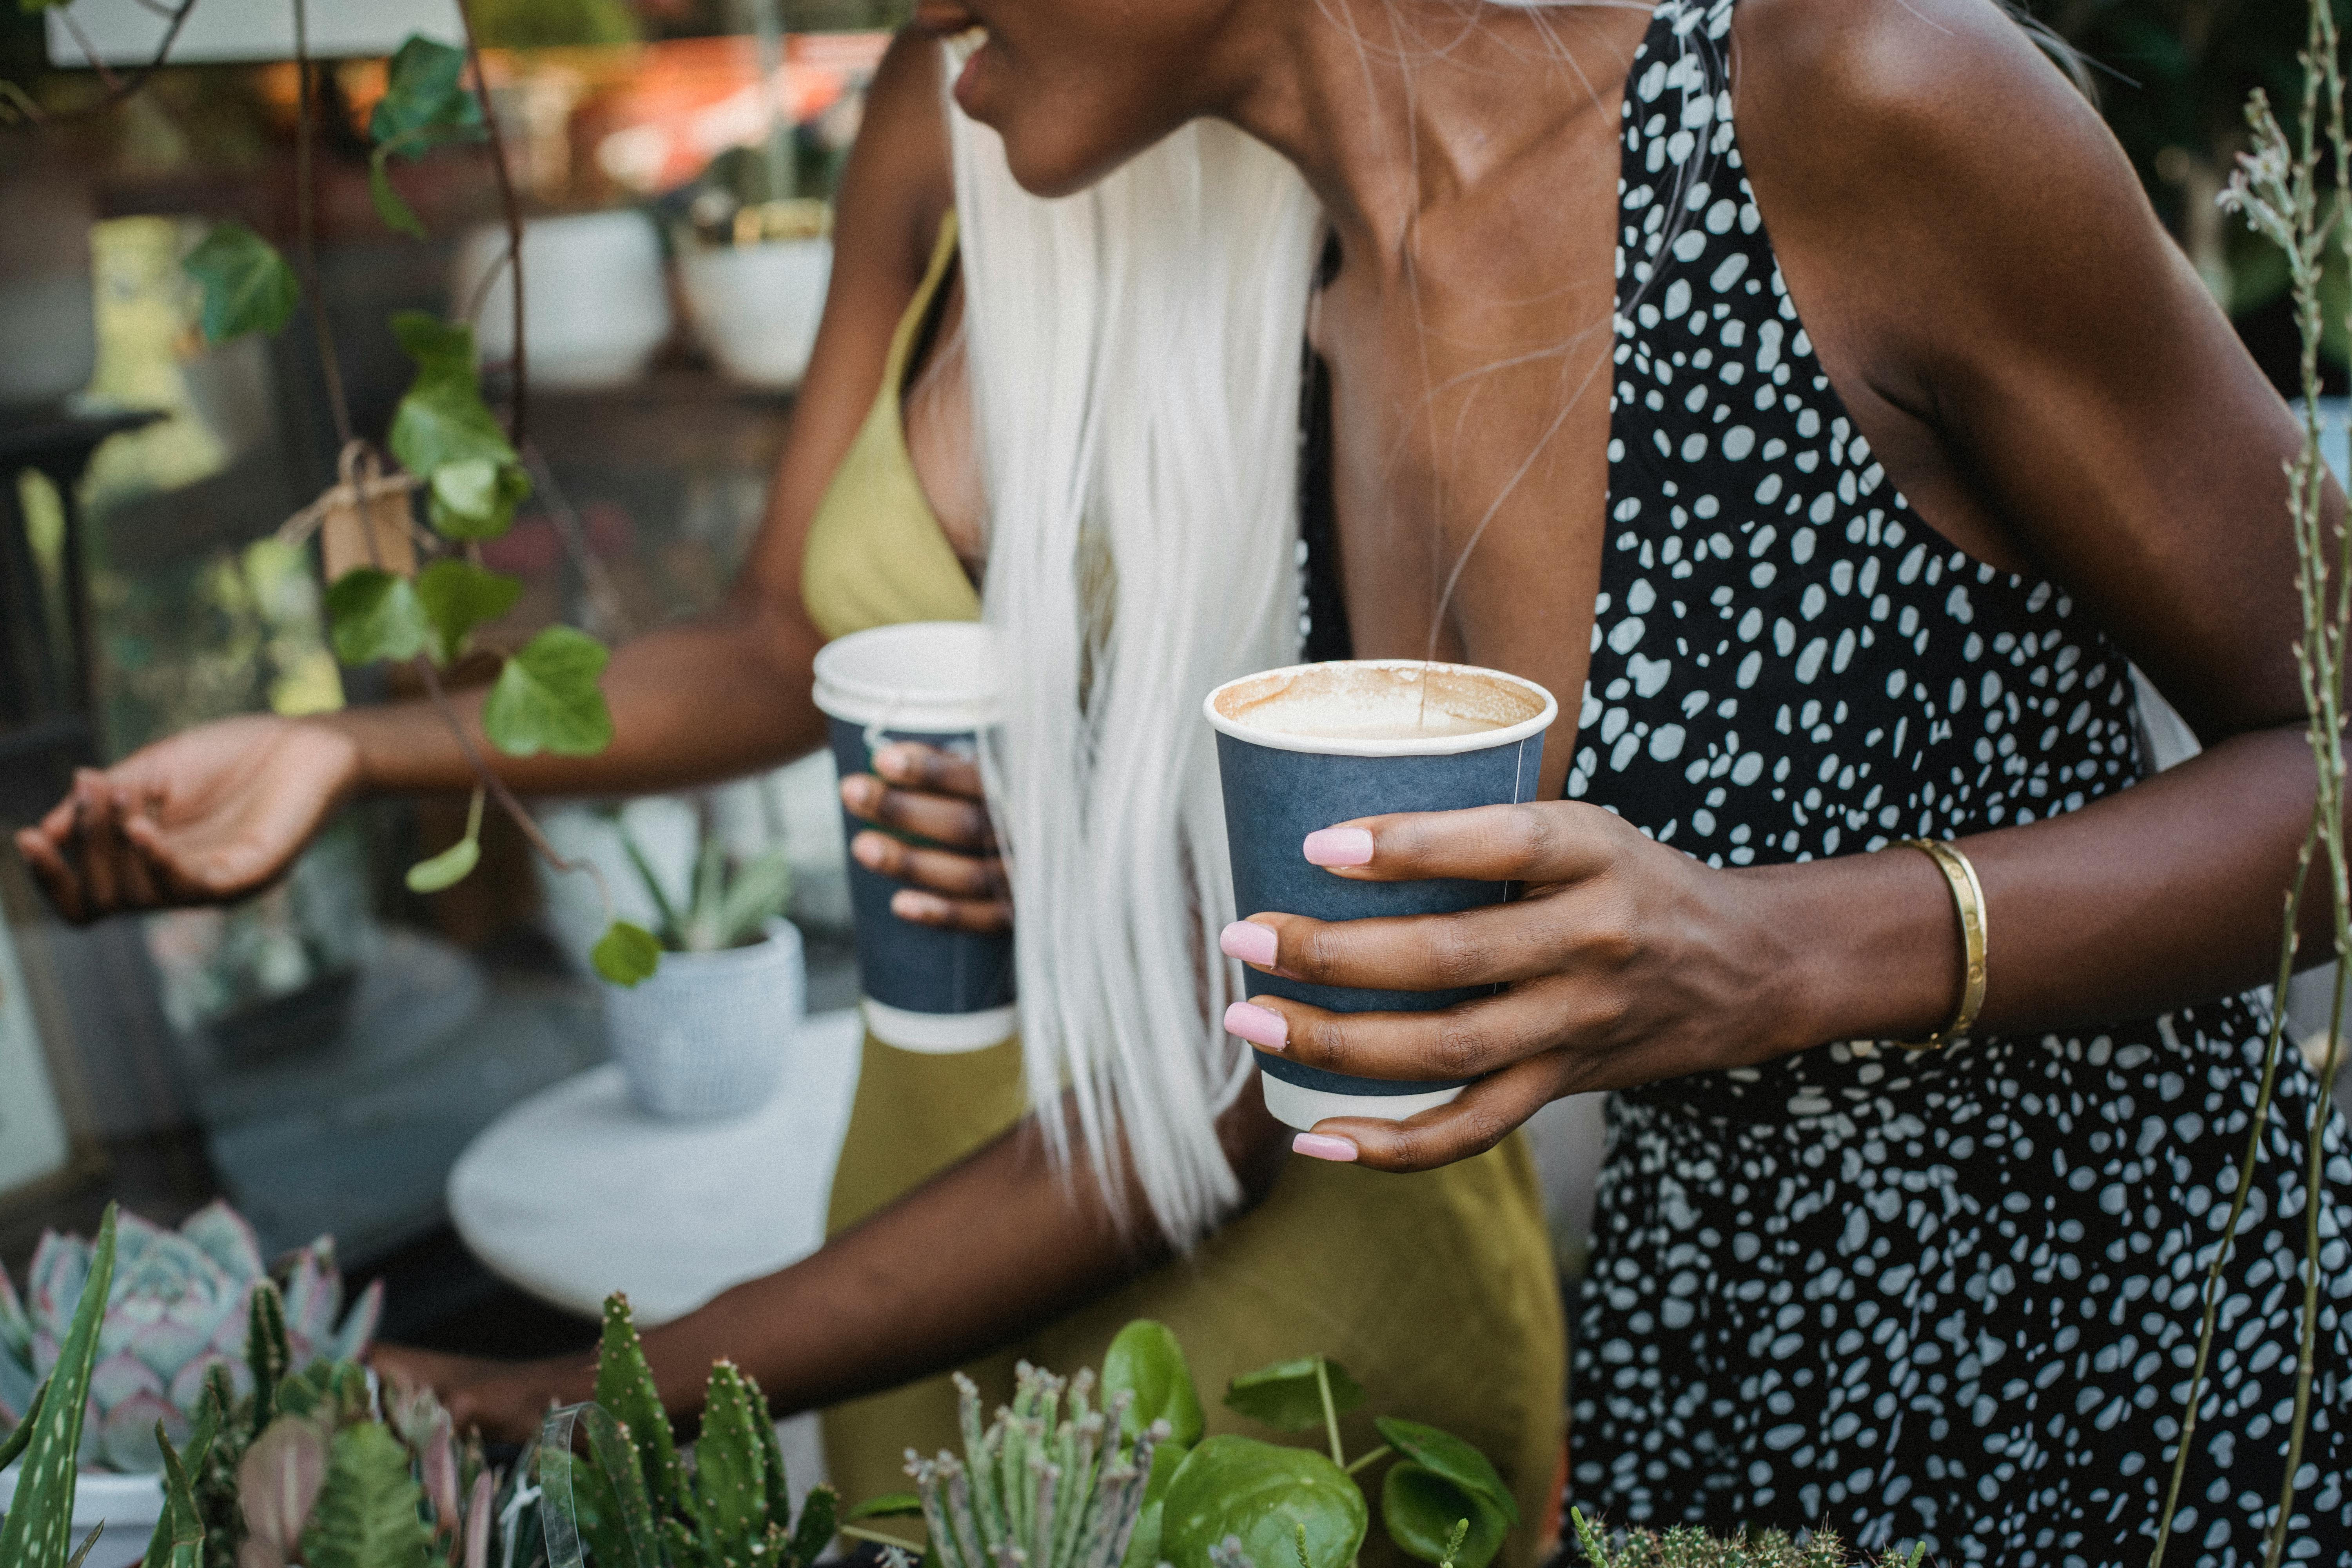 Women Drinking Coffee and Looking at Plants 